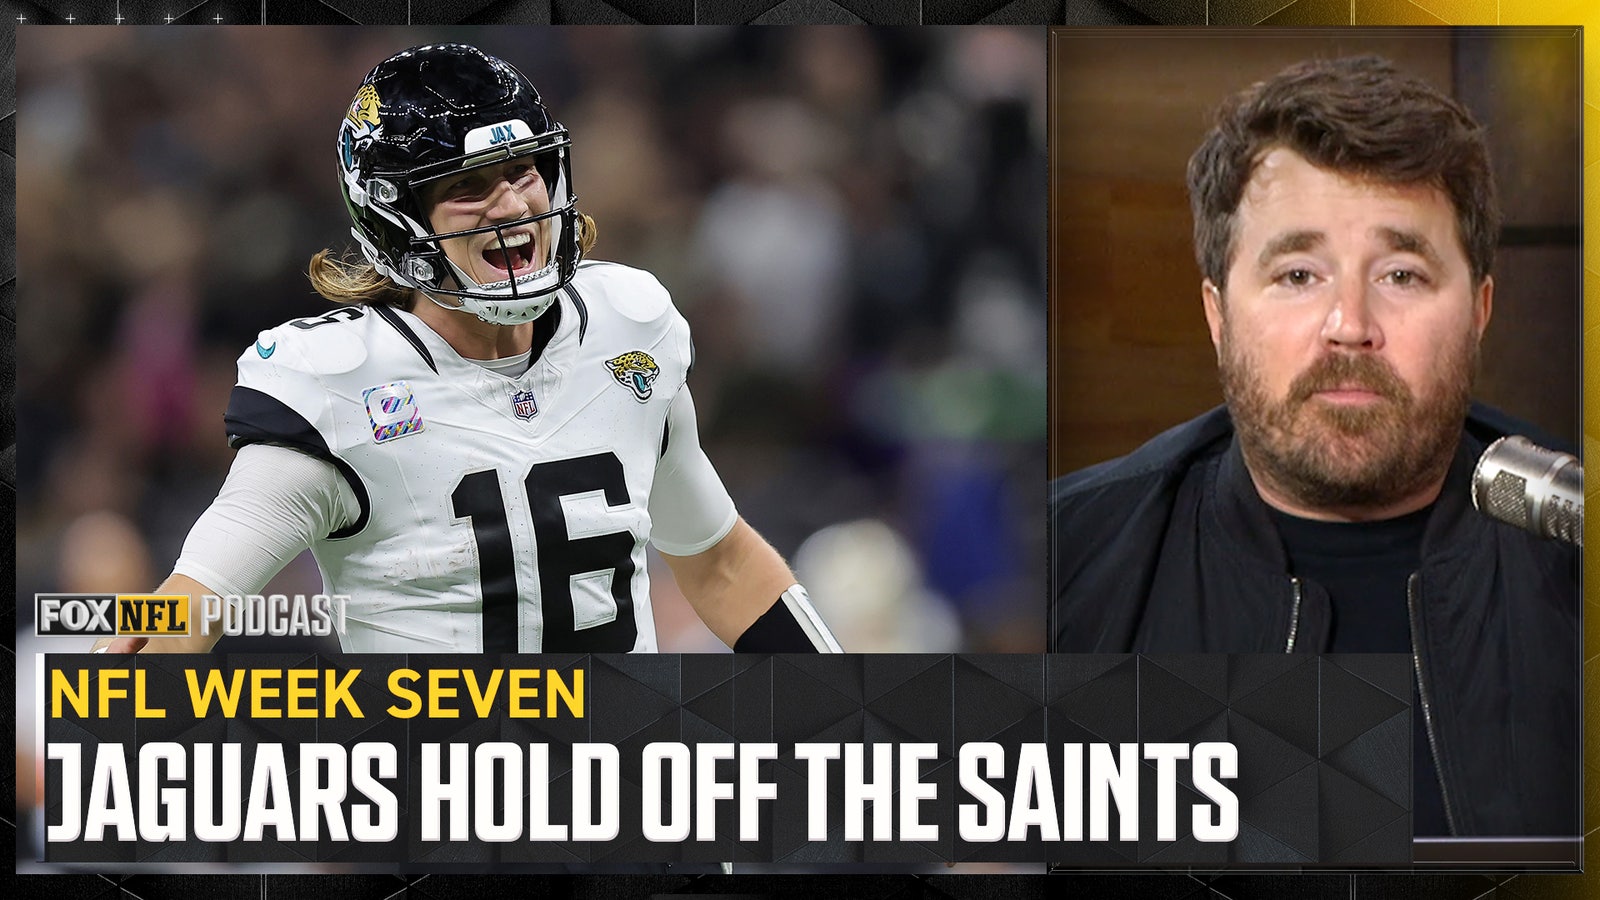 Dave Helman reacts to Jacksonville's win over the Saints 